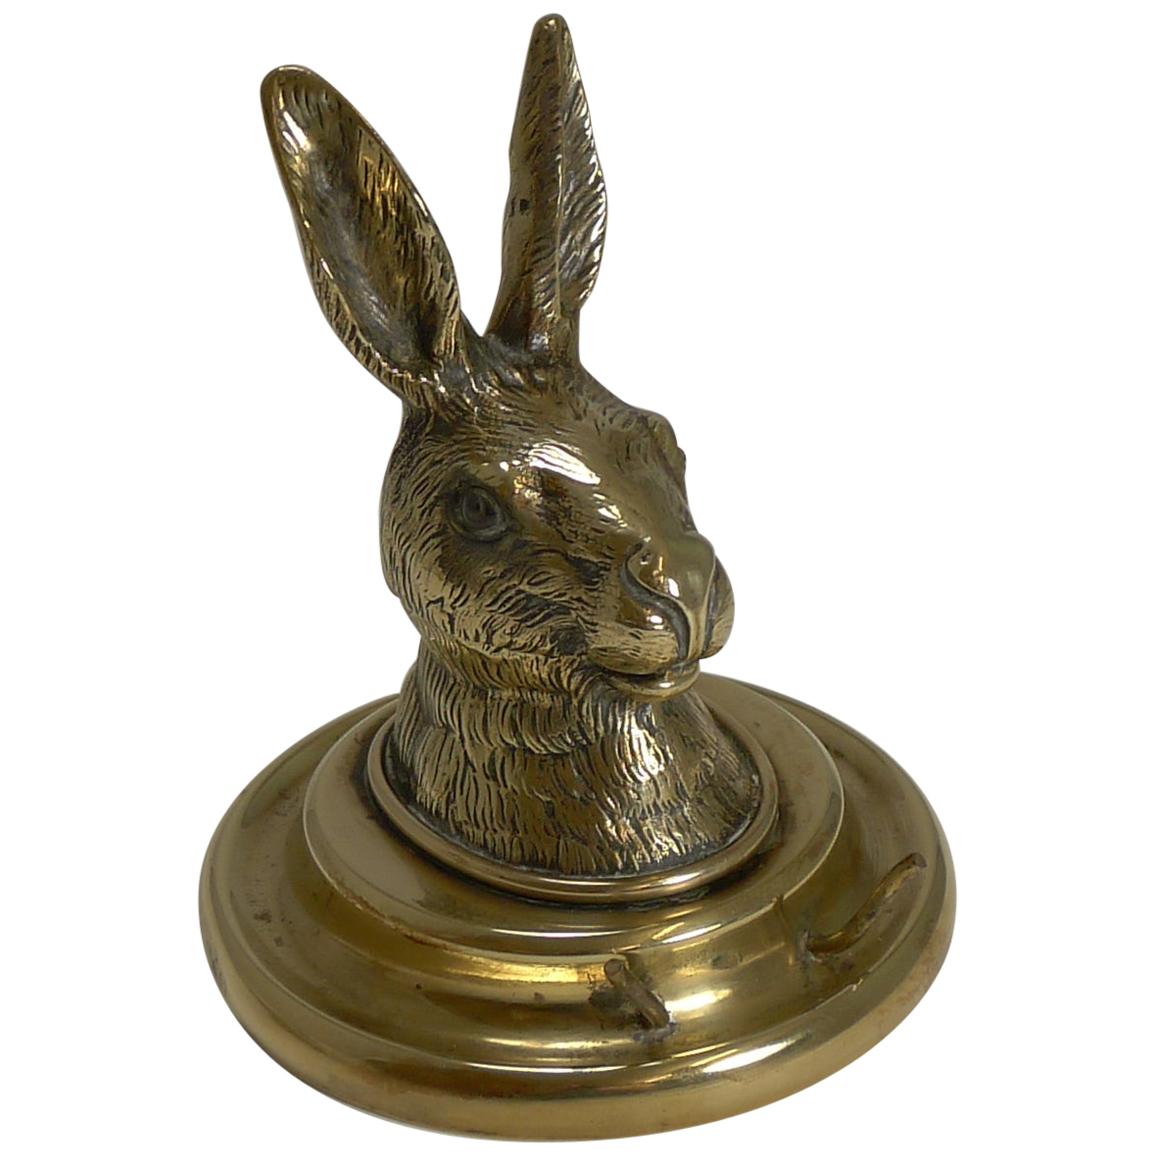 Antique English Novelty / Figural Brass Inkwell - Hare c.1880 For Sale